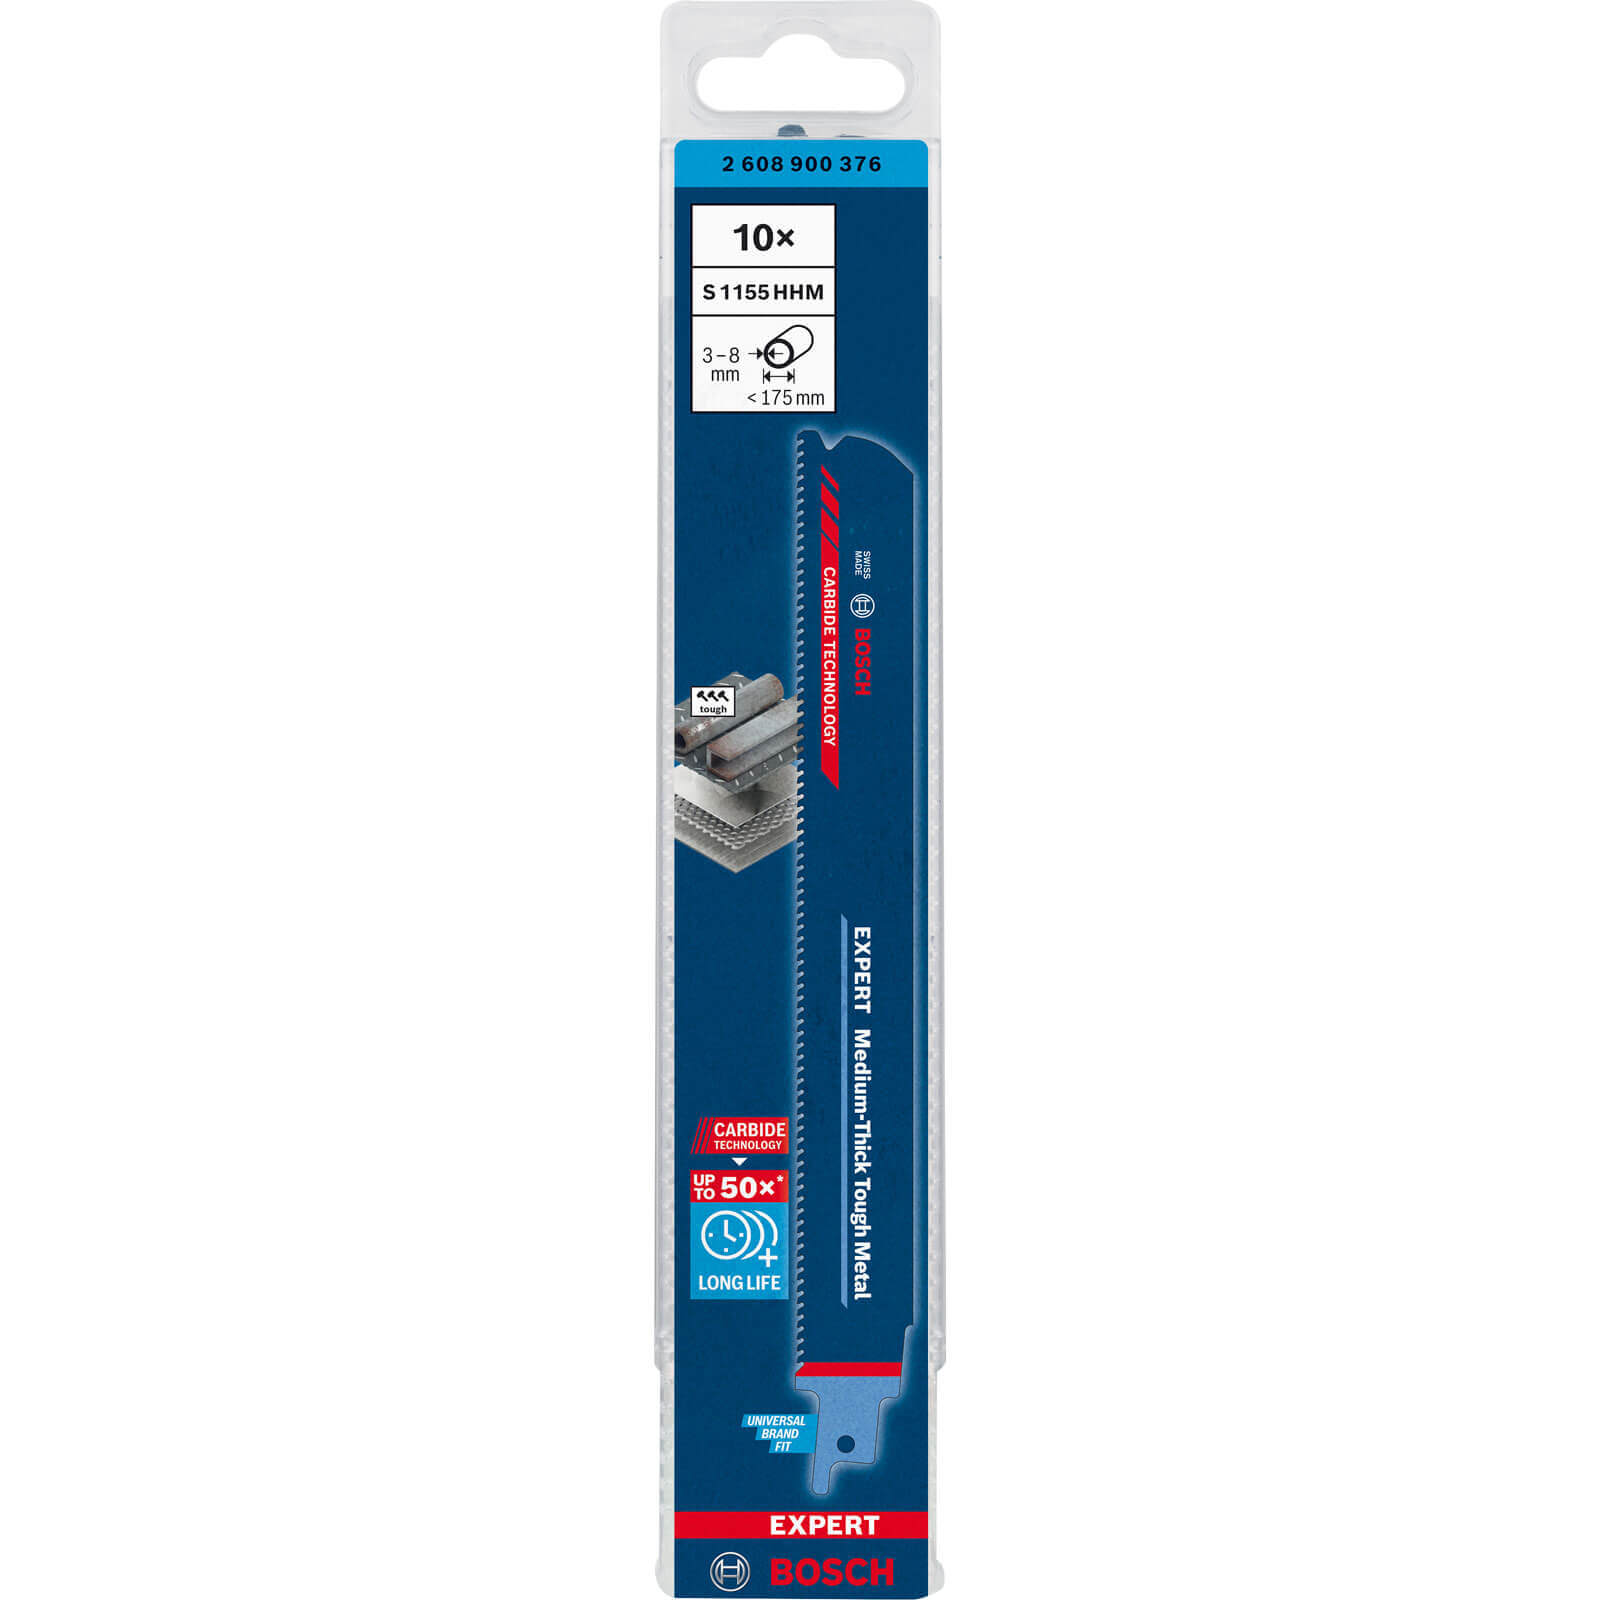 Image of Bosch Expert S1155HHM Medium-Thick Tough Metal Cutting Reciprocating Sabre Saw Blades 225mm Pack of 10